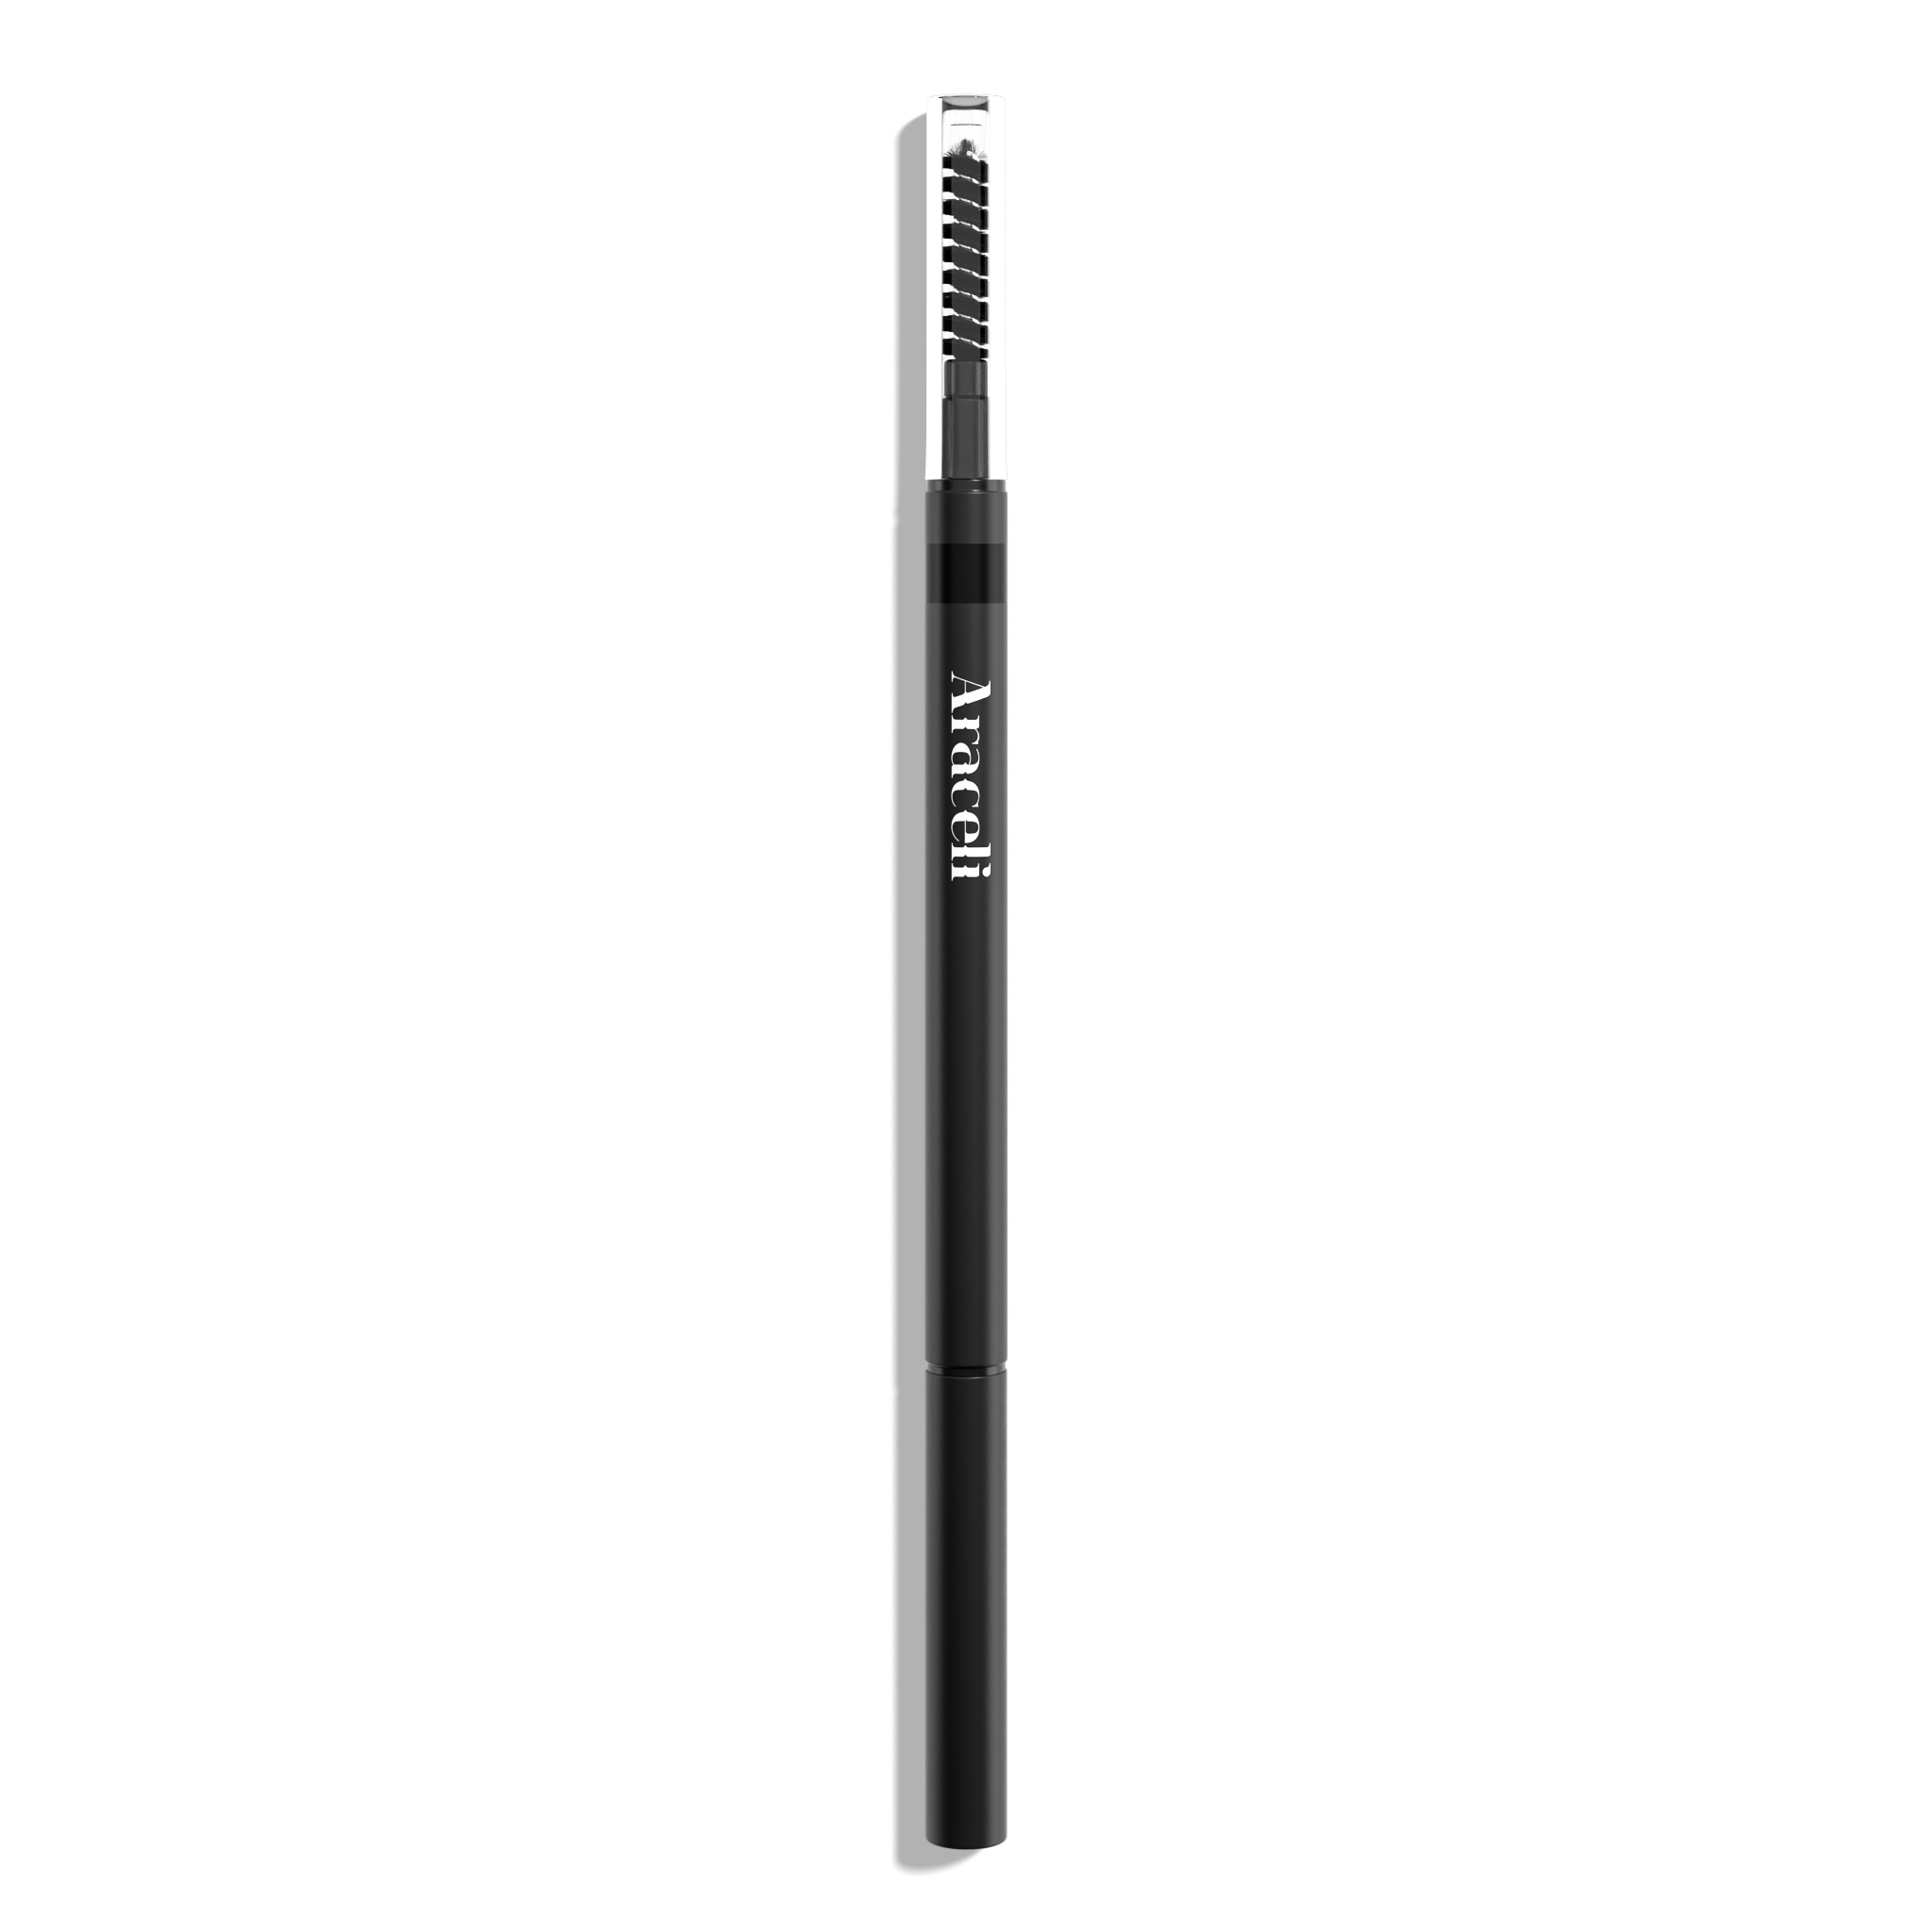 Premium Photo  Black pencil on white background with soft shadow